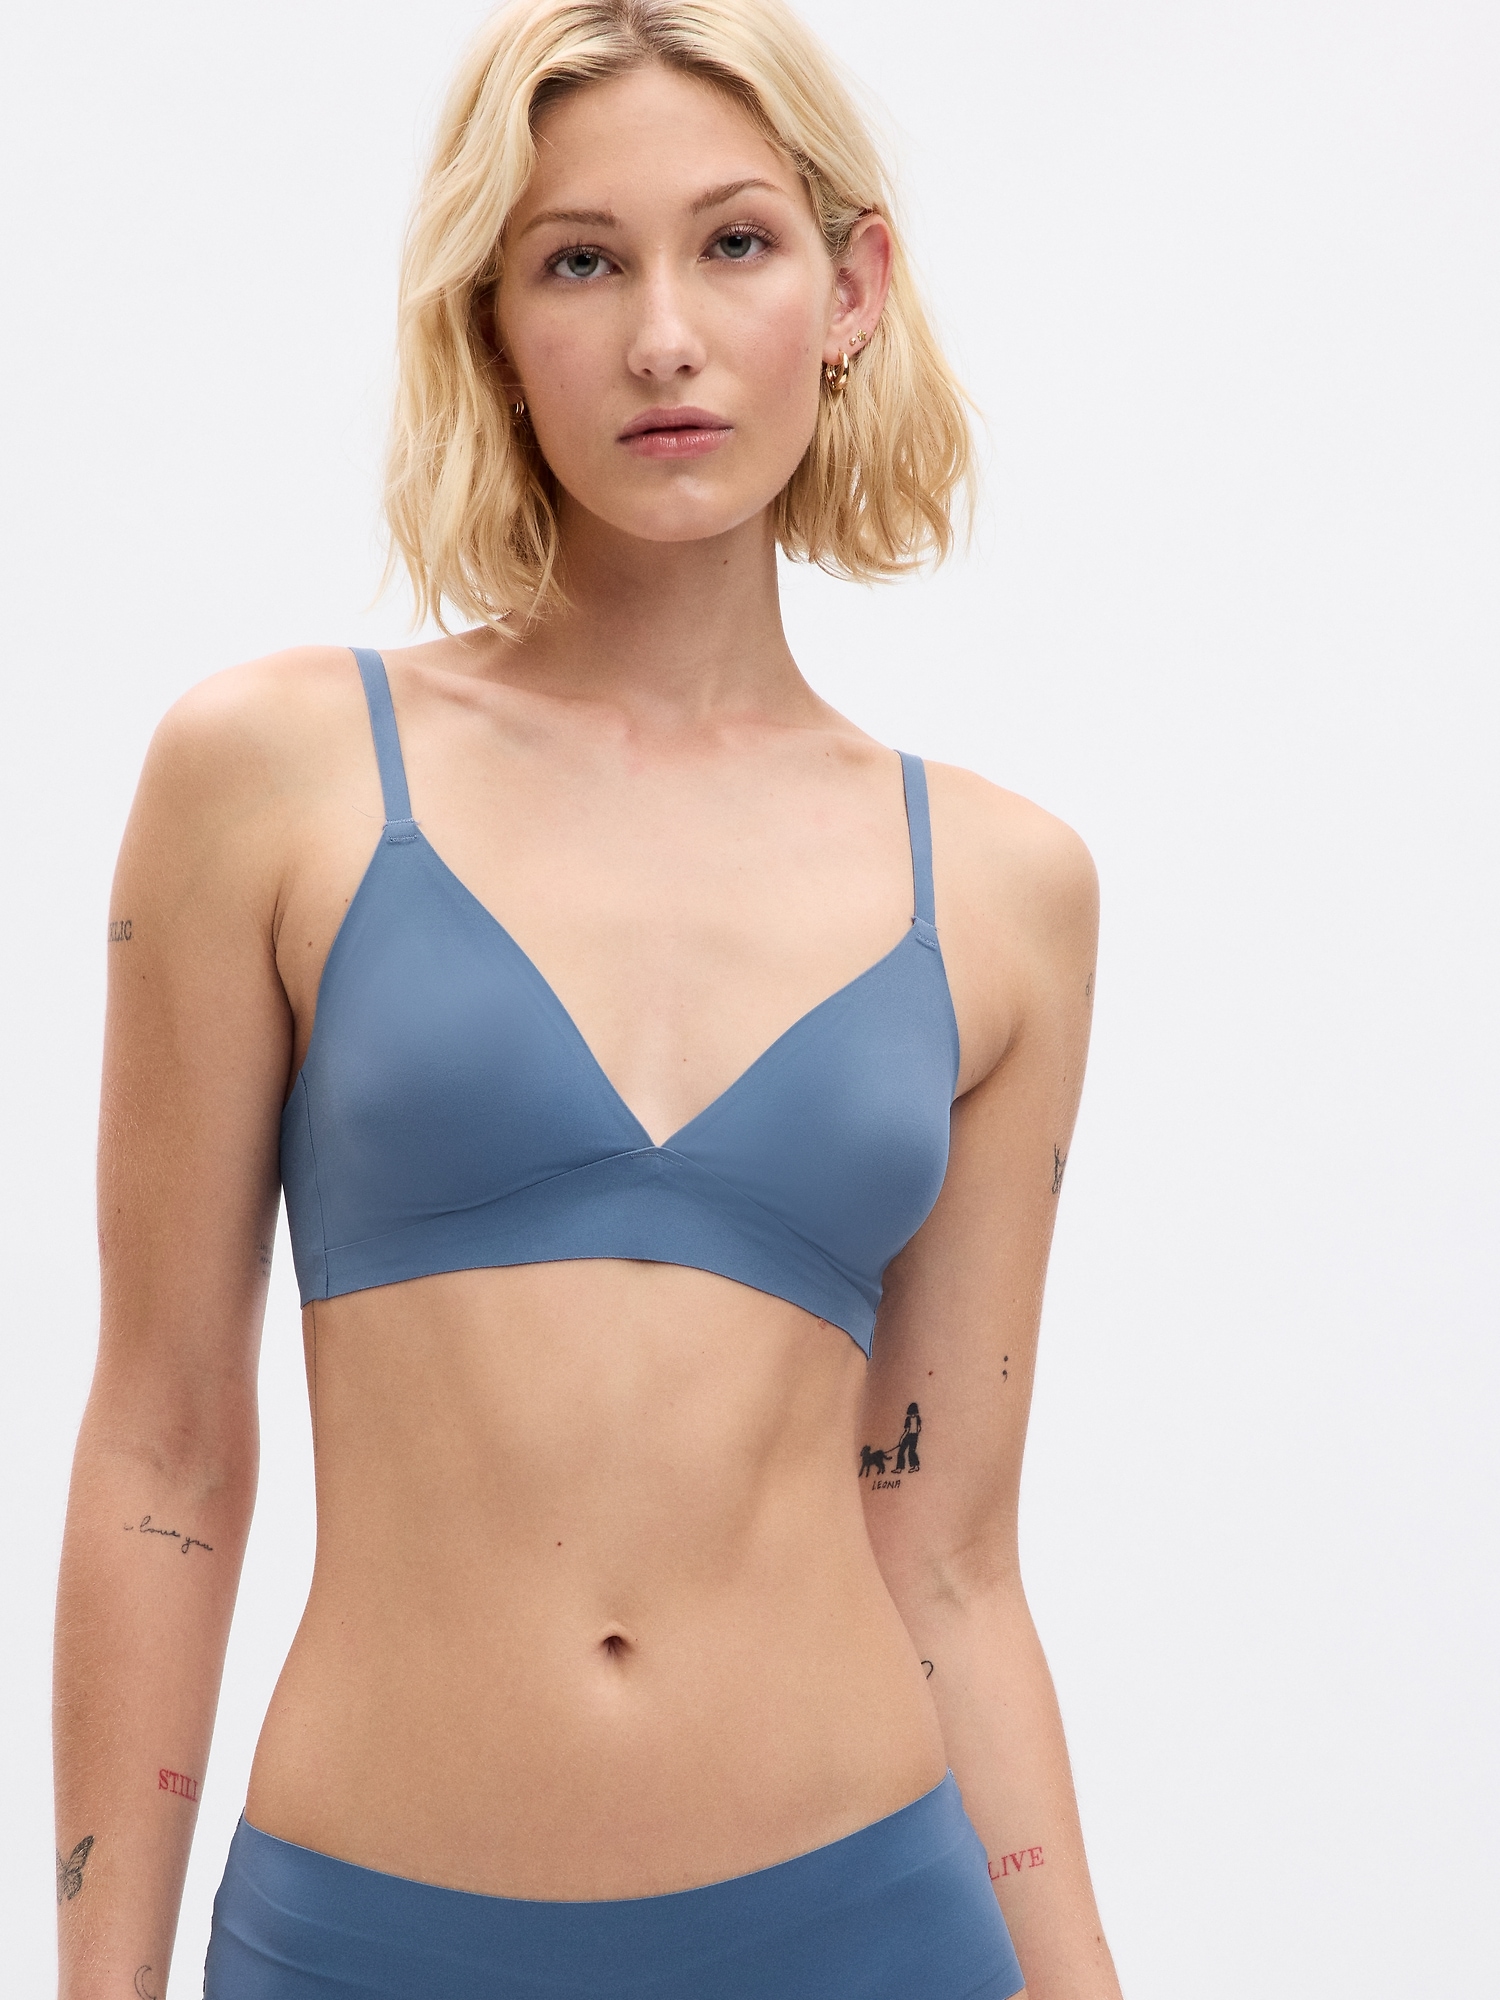 Buy Gap Breathe Favourite Lace Bra from the Gap online shop